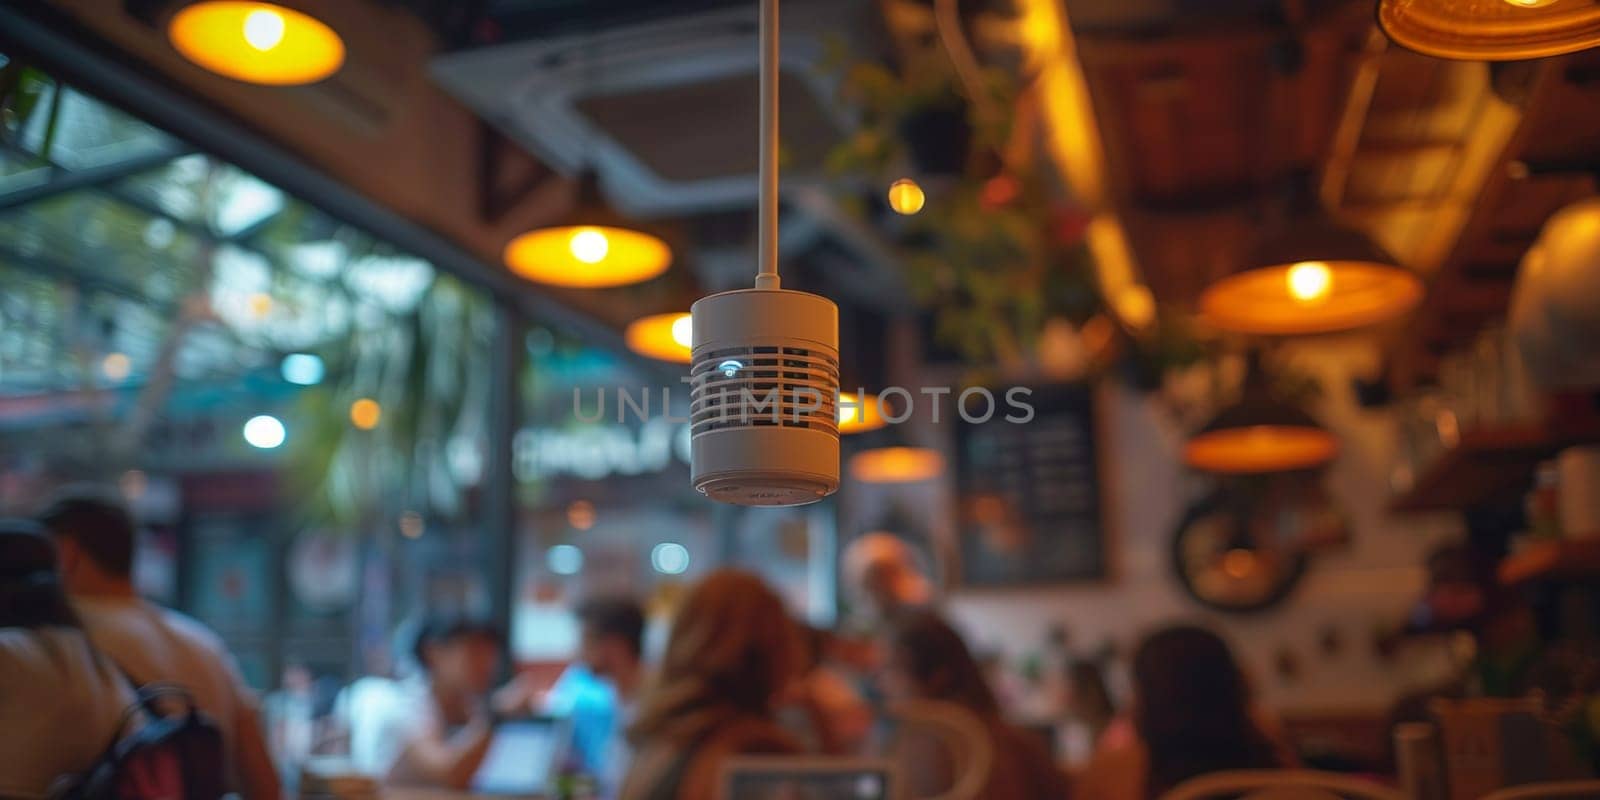 Group of People Sitting at Table in Restaurant by but_photo